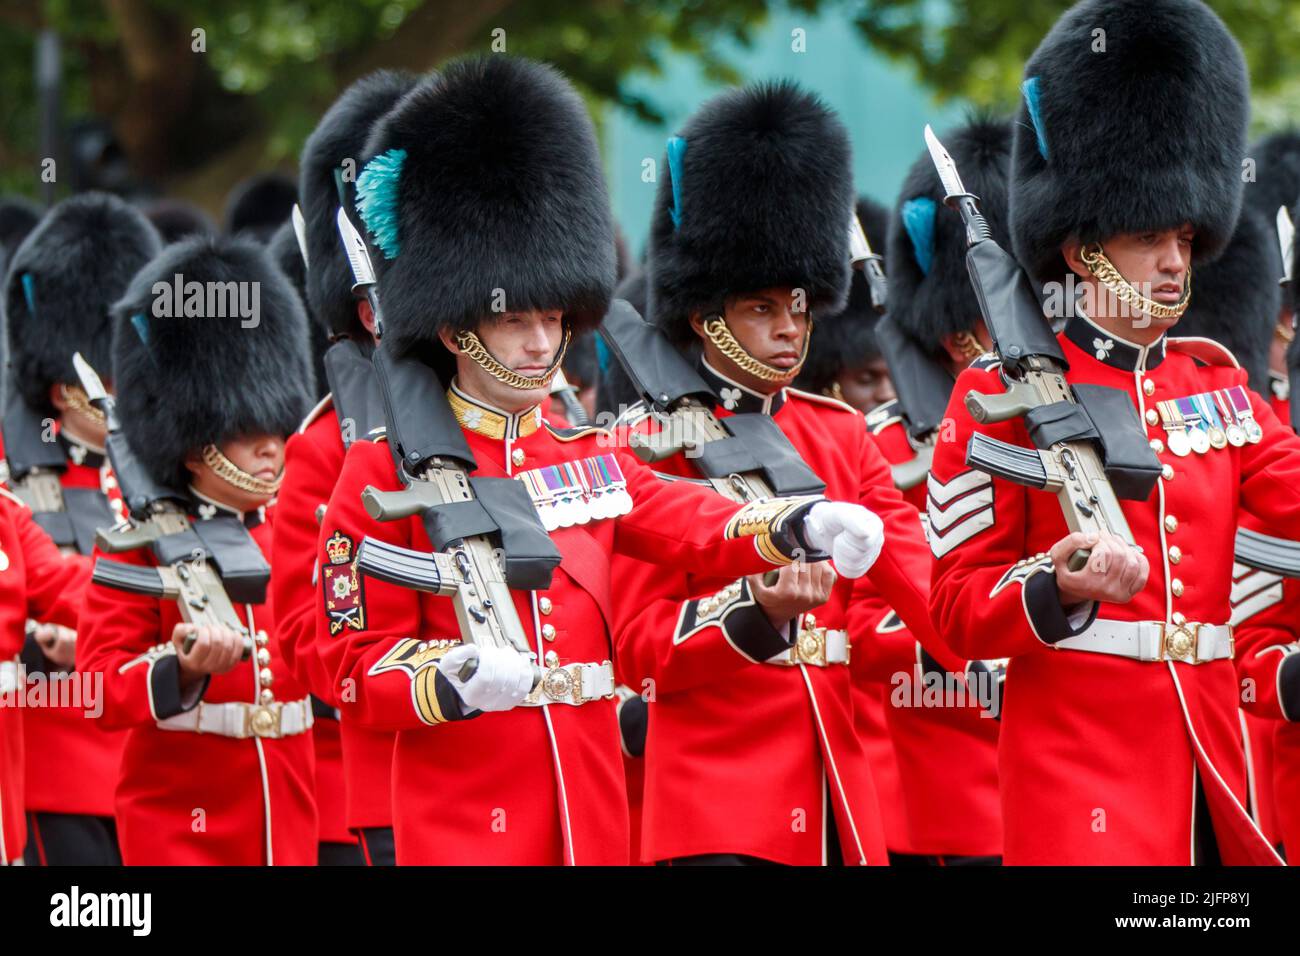 Irish Guards at Trooping the Color, Colonel’s Review in the Mall, London, England, Vereinigtes Königreich am Samstag, 28. Mai 2022. Stockfoto